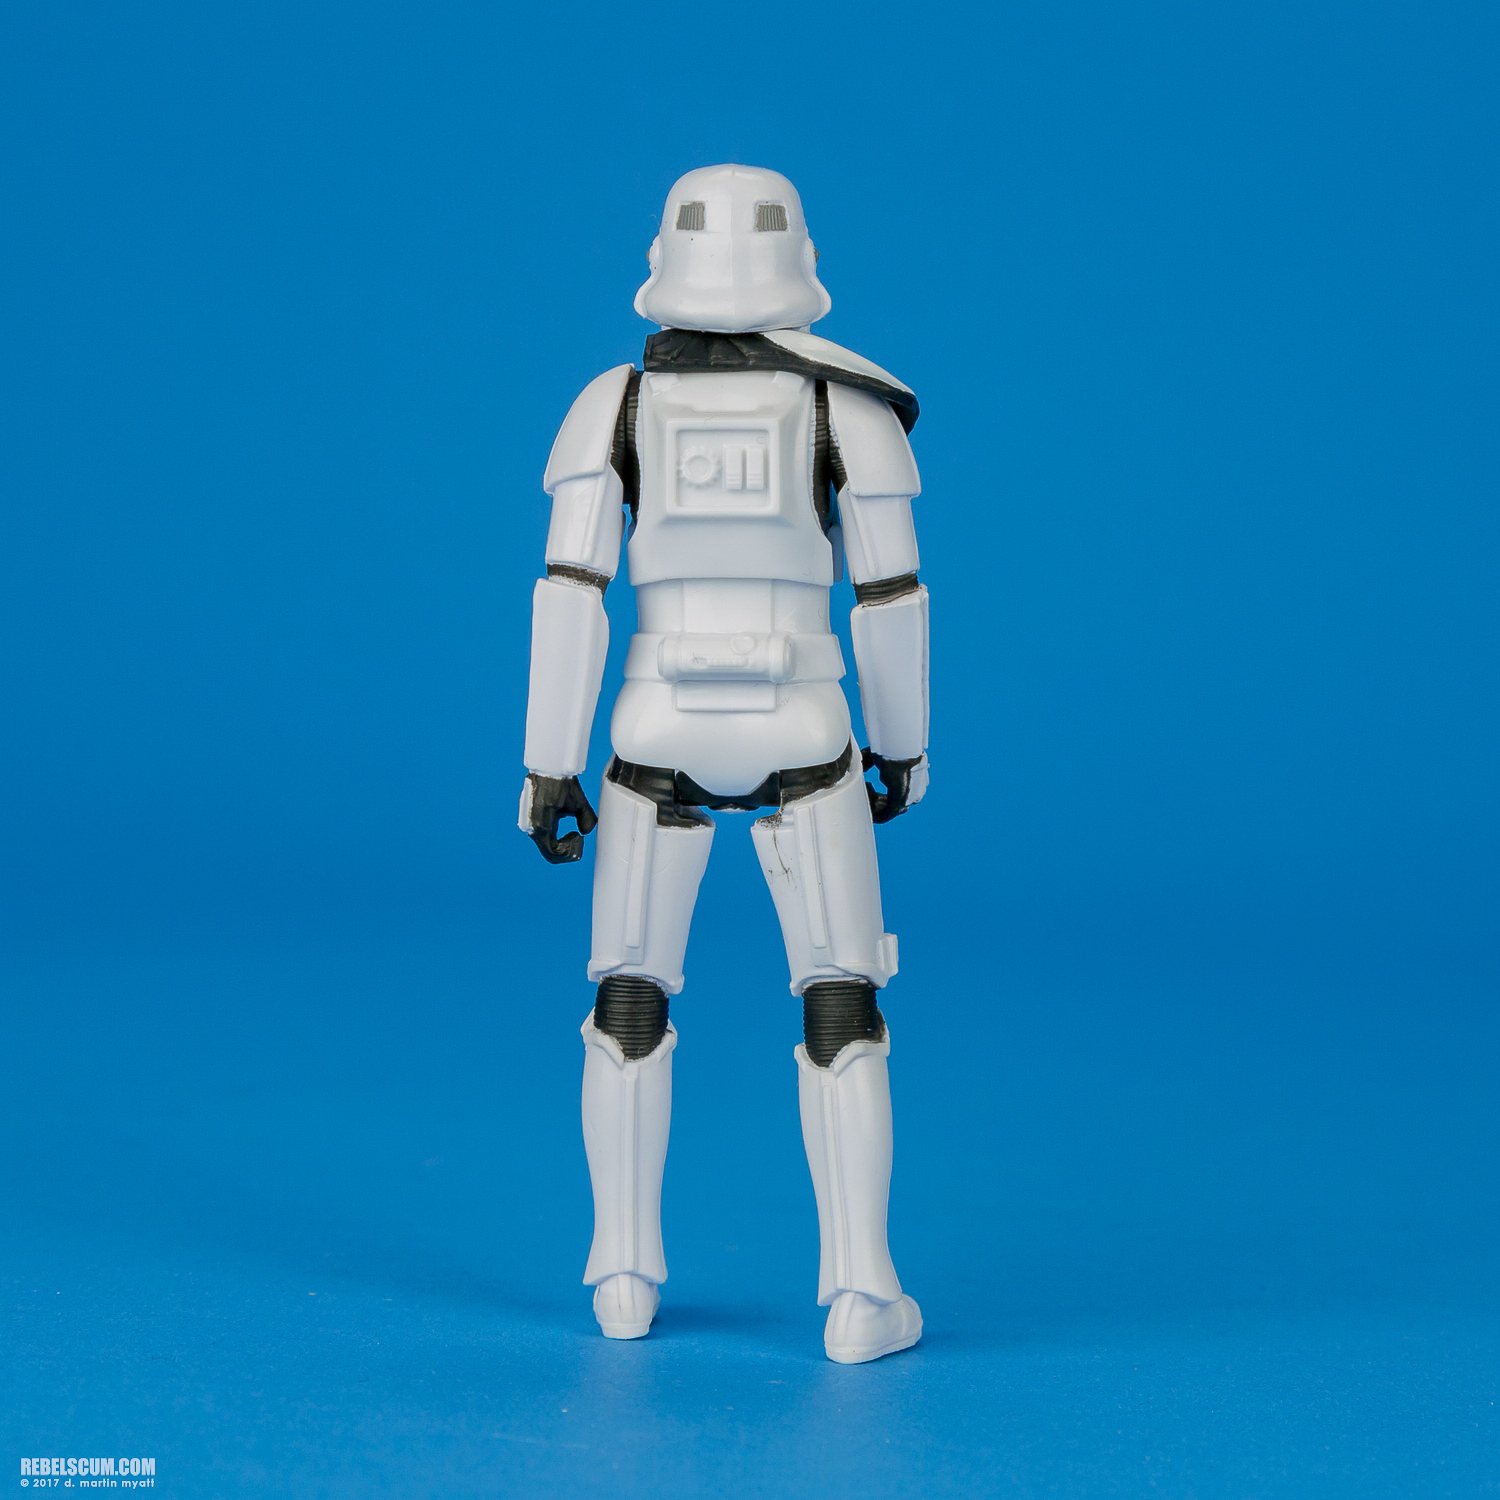 Kohls-Exclusive-Four-Pack-Rogue-One-B9605-017.jpg